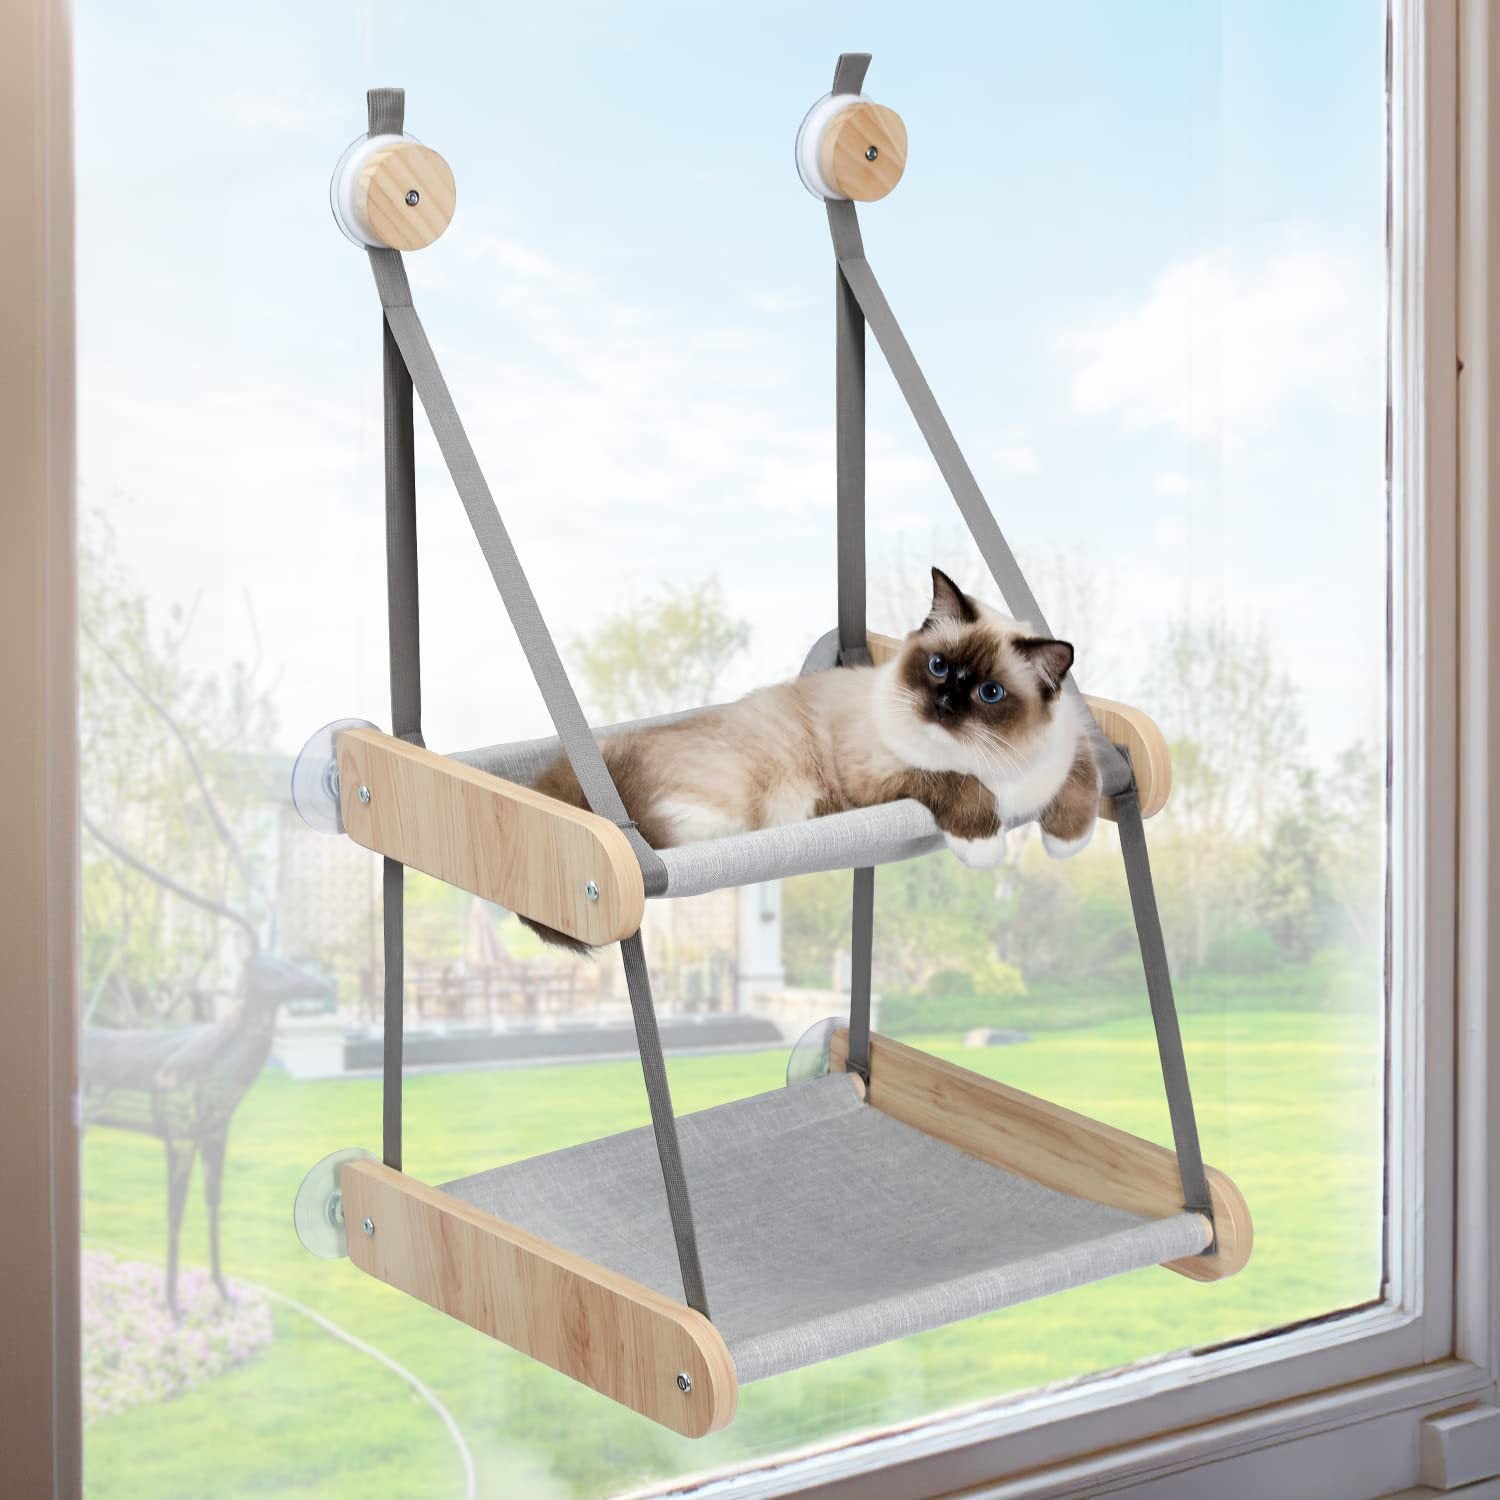 double-cat-hammock-with-cat